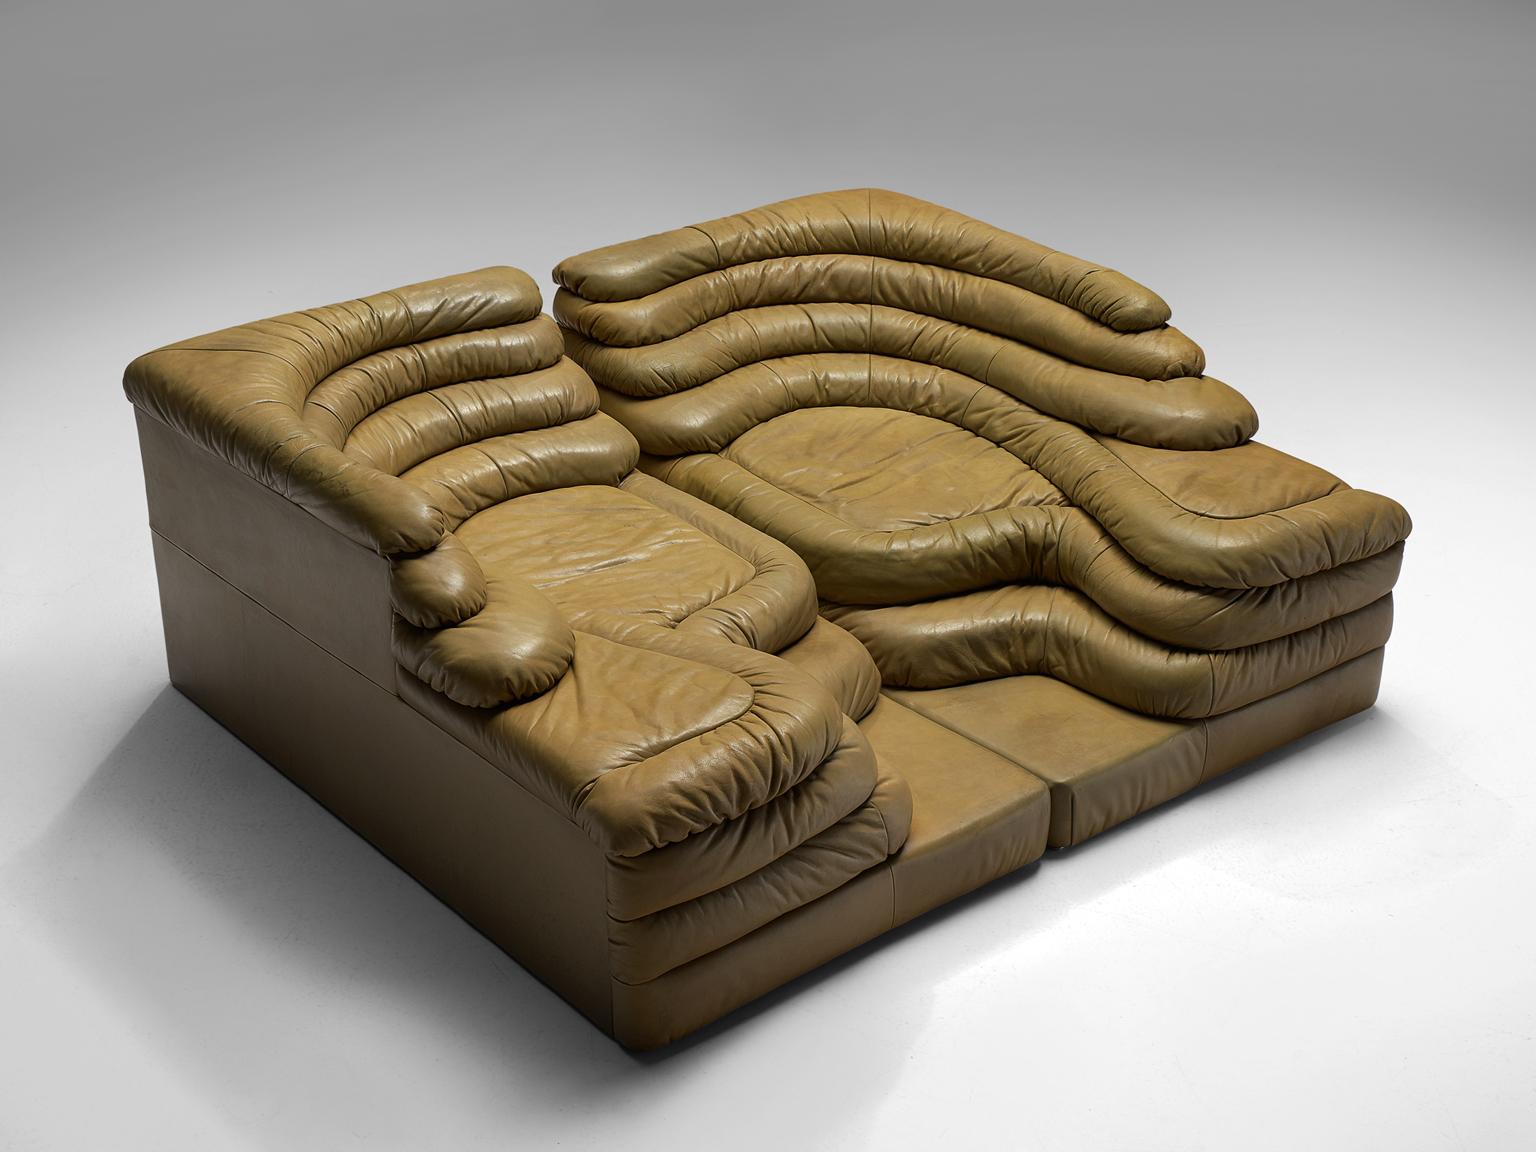 Ubald Klug for De Sede, two DS1025 'Terrazza' landscape elements, green brownish quality leather, by Switzerland, 1970s. 

This waterfall shaped sofa in light brown to green leather is designed by the Swiss manufacturer De Sede. The design for